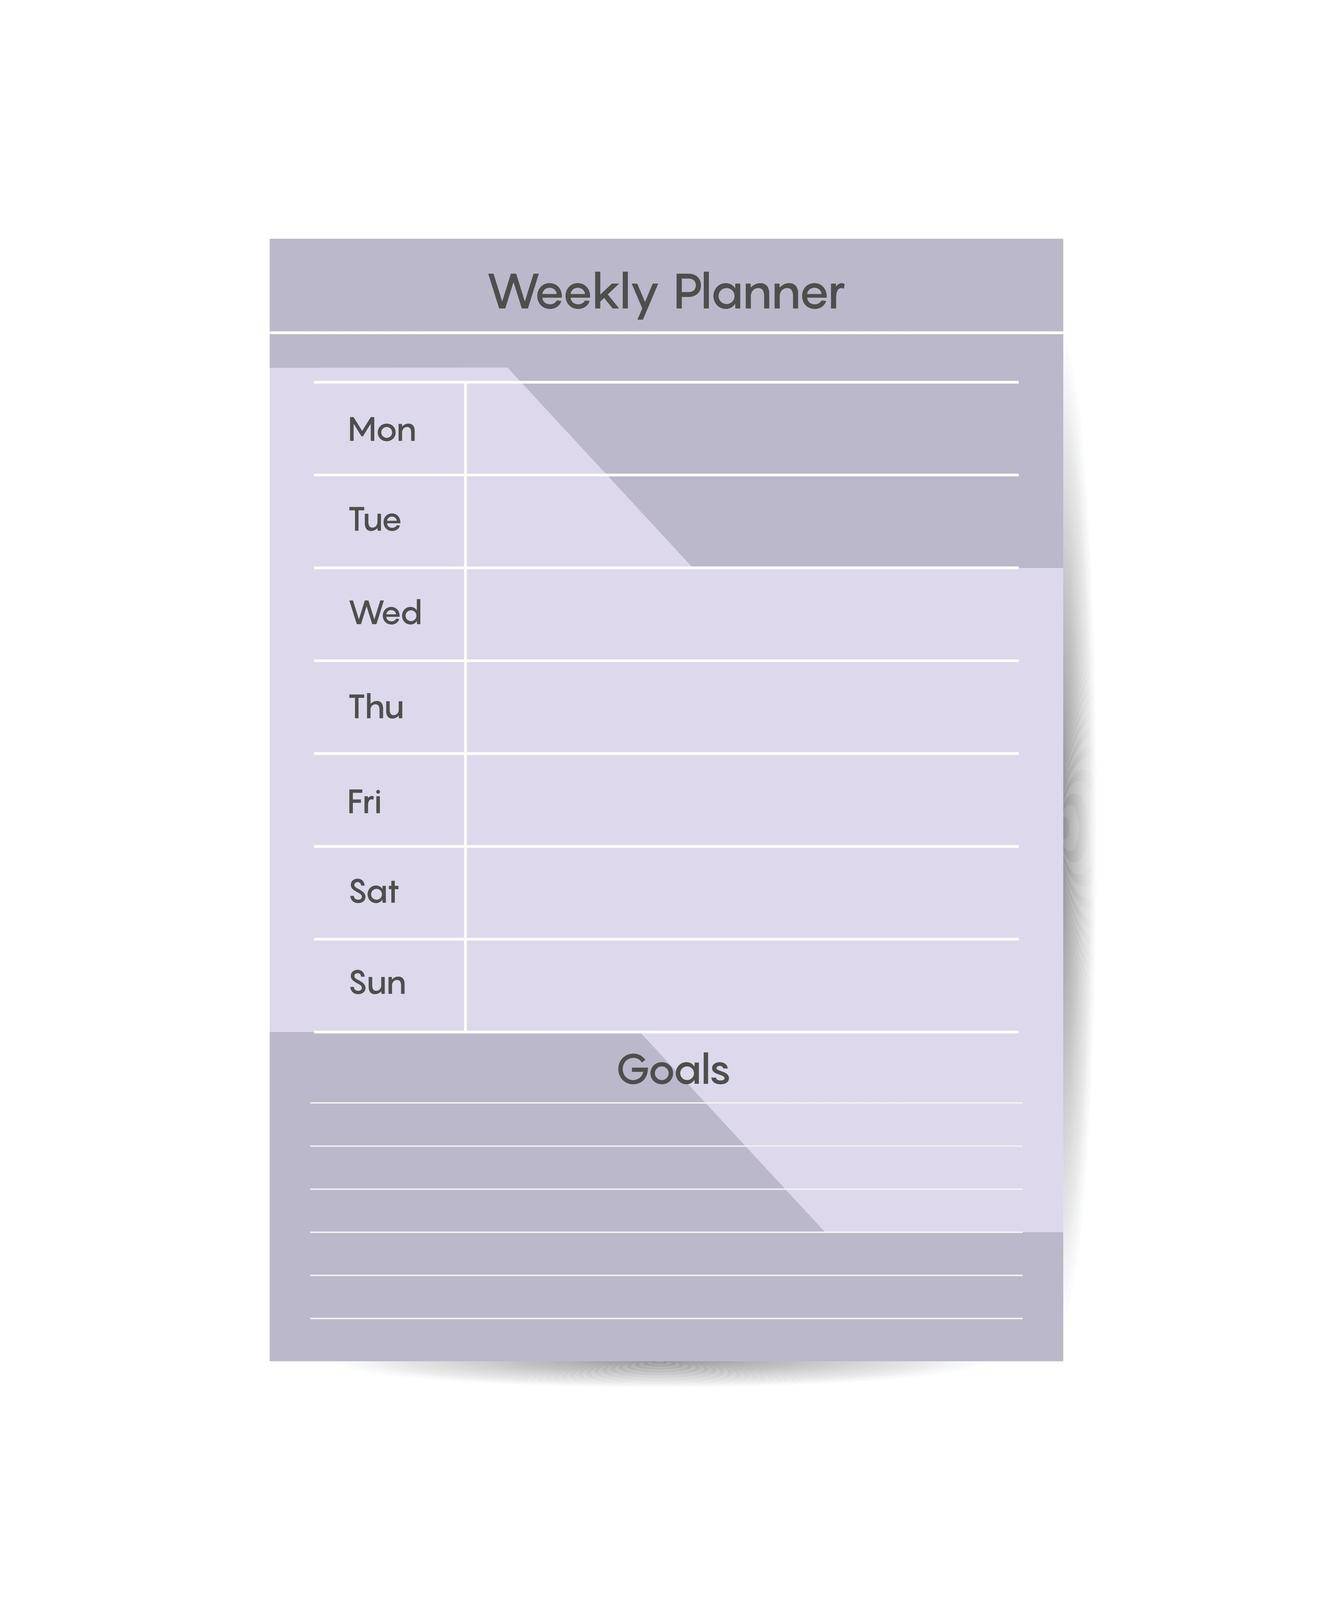 Weekly planner Template Ready for Print with Space for To-Do List, Schedule, Activities, Appointments by ANITA